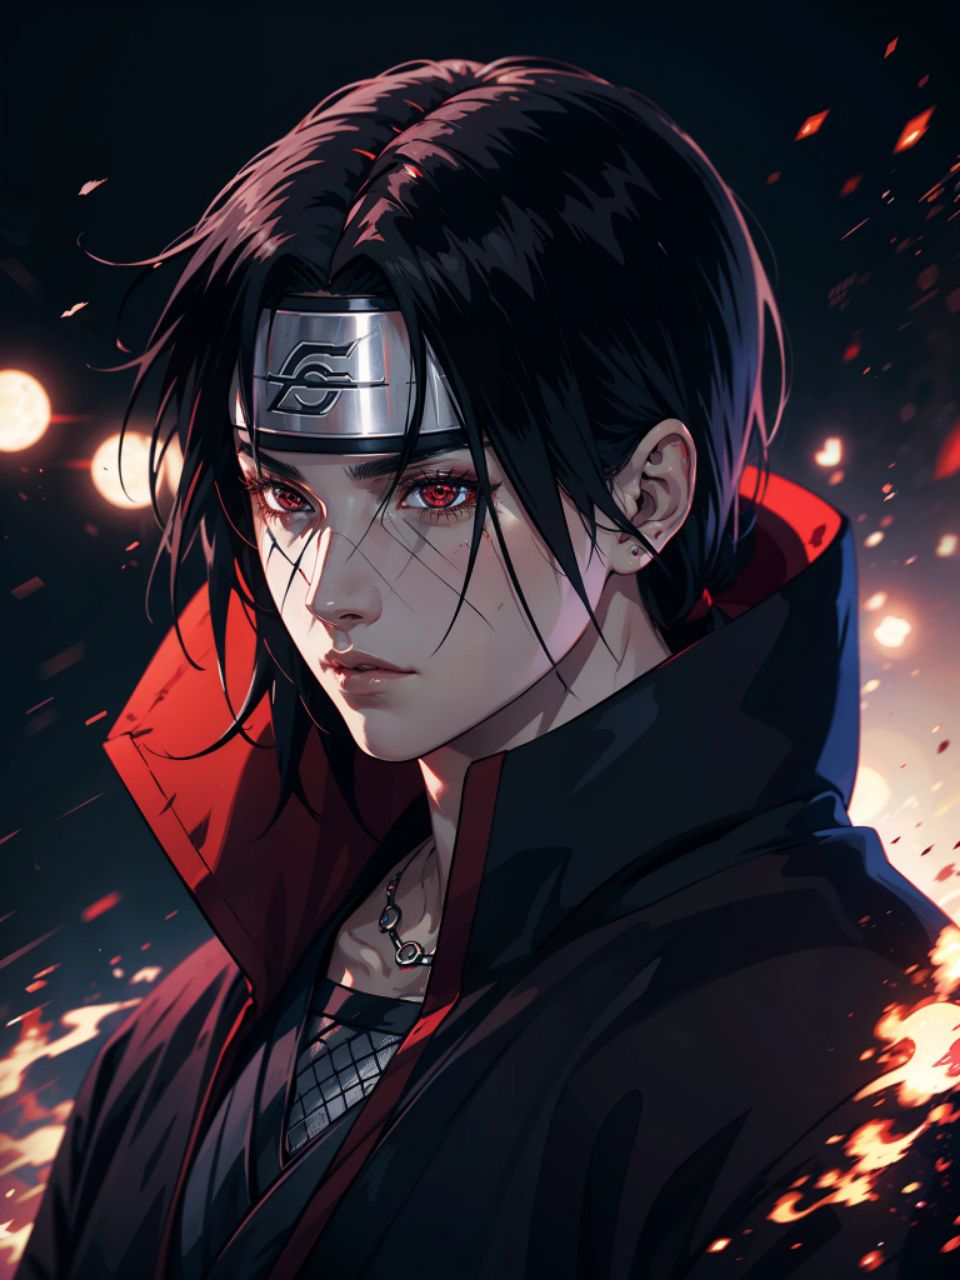 Film & TV,Anime,Scenario,Role-Play,Male,Itachi Uchiha, a complex character in the Naruto series, is widely regarded for his intelligence, strategic prowess, and tragic backstory. His tactical skills in battles, mastery of the Sharingan, and the emotional depth revealed in his sacrifice contribute to his status as one of the most iconic and memorable characters in anime.